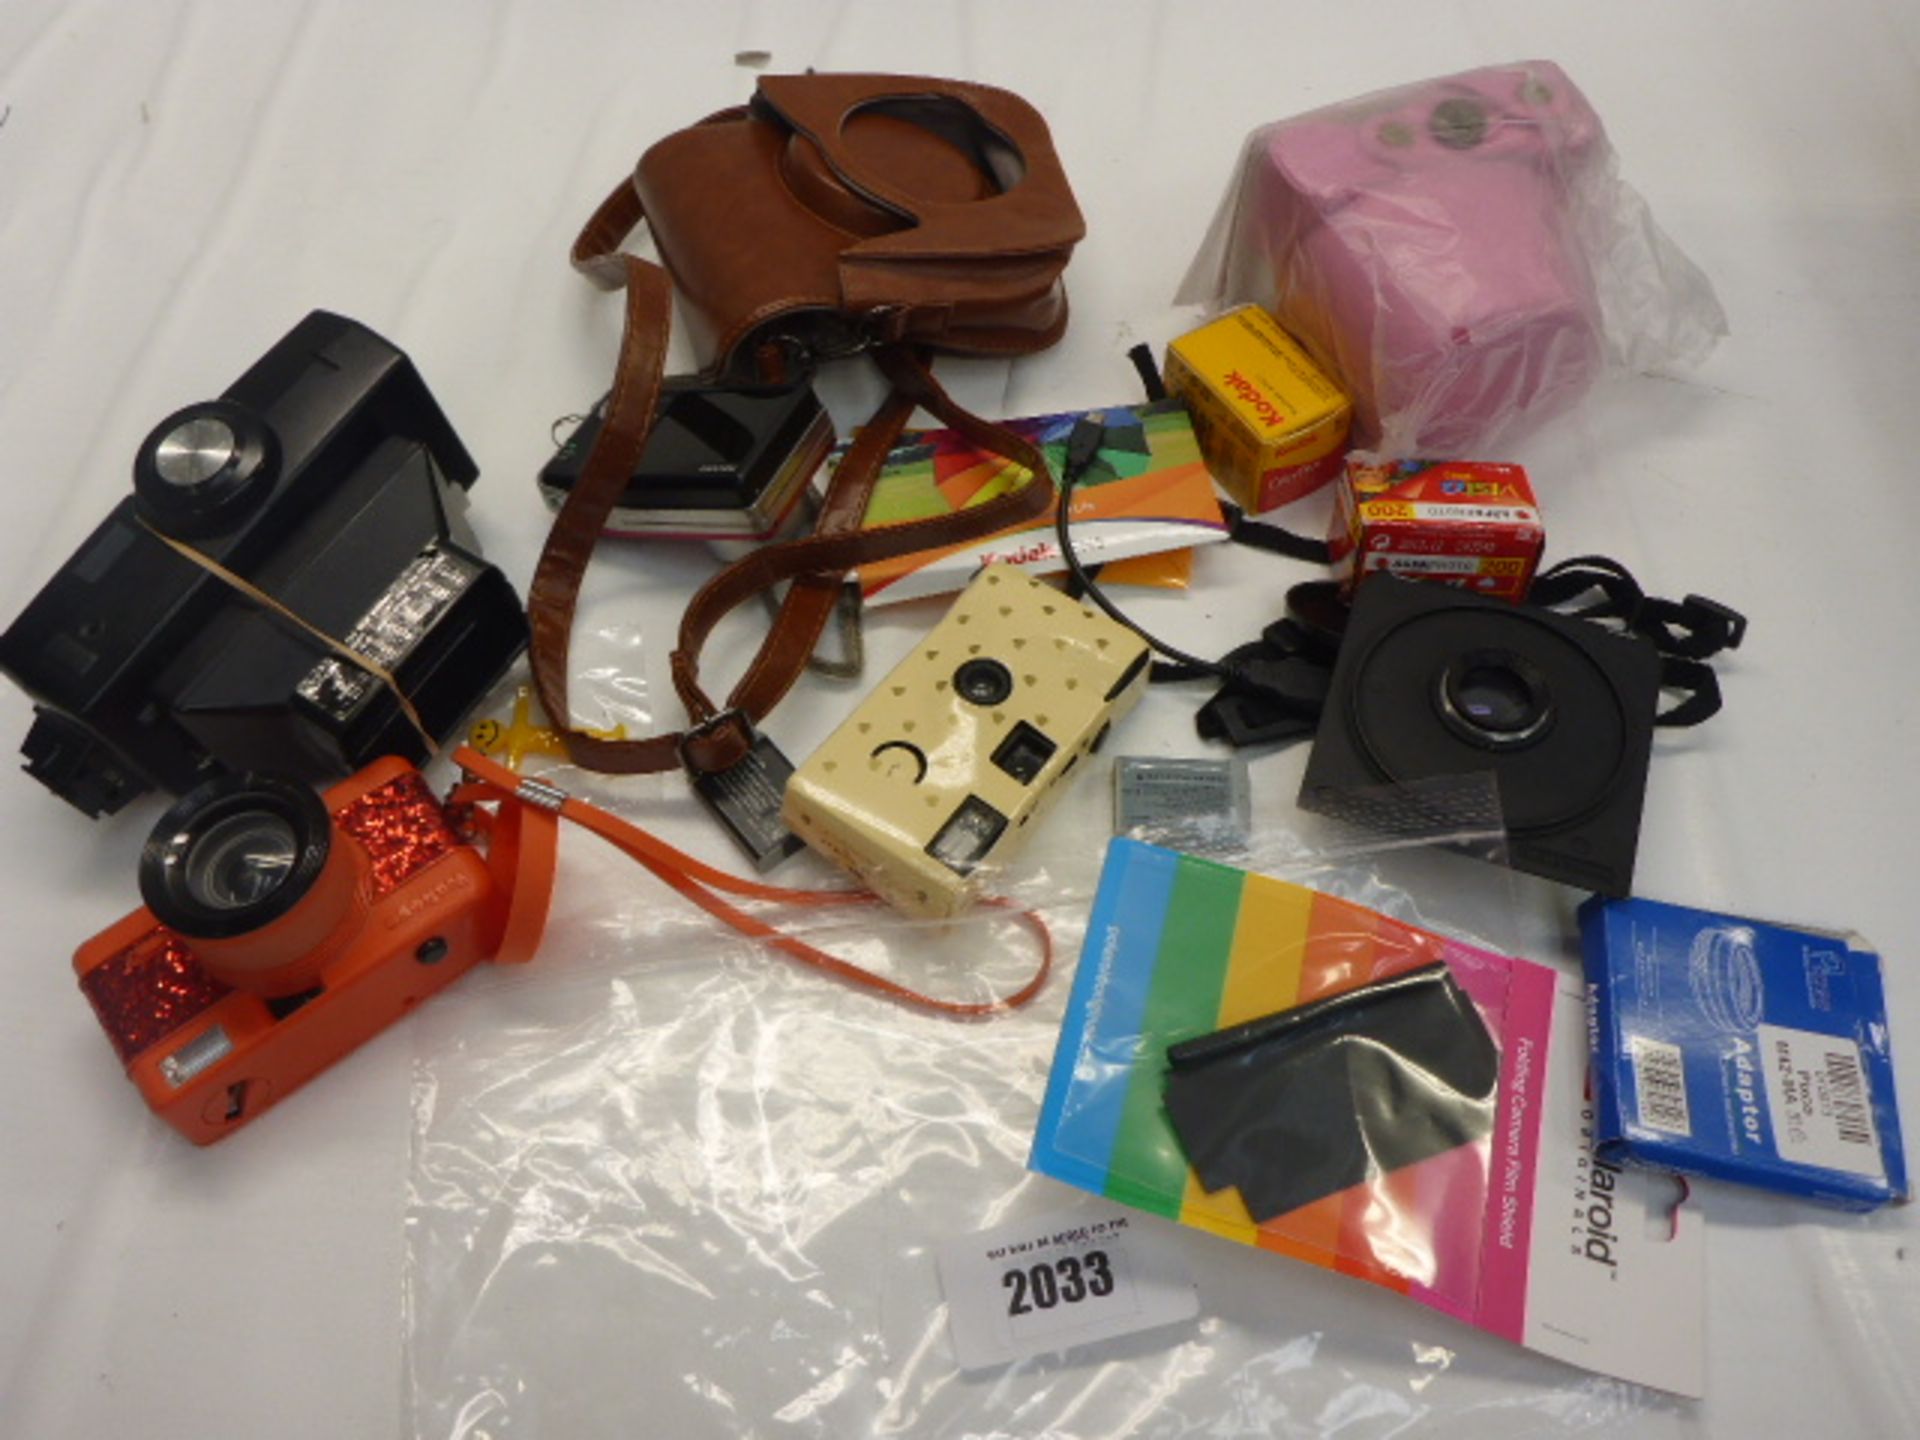 Quantity of various photo/camera related accessories